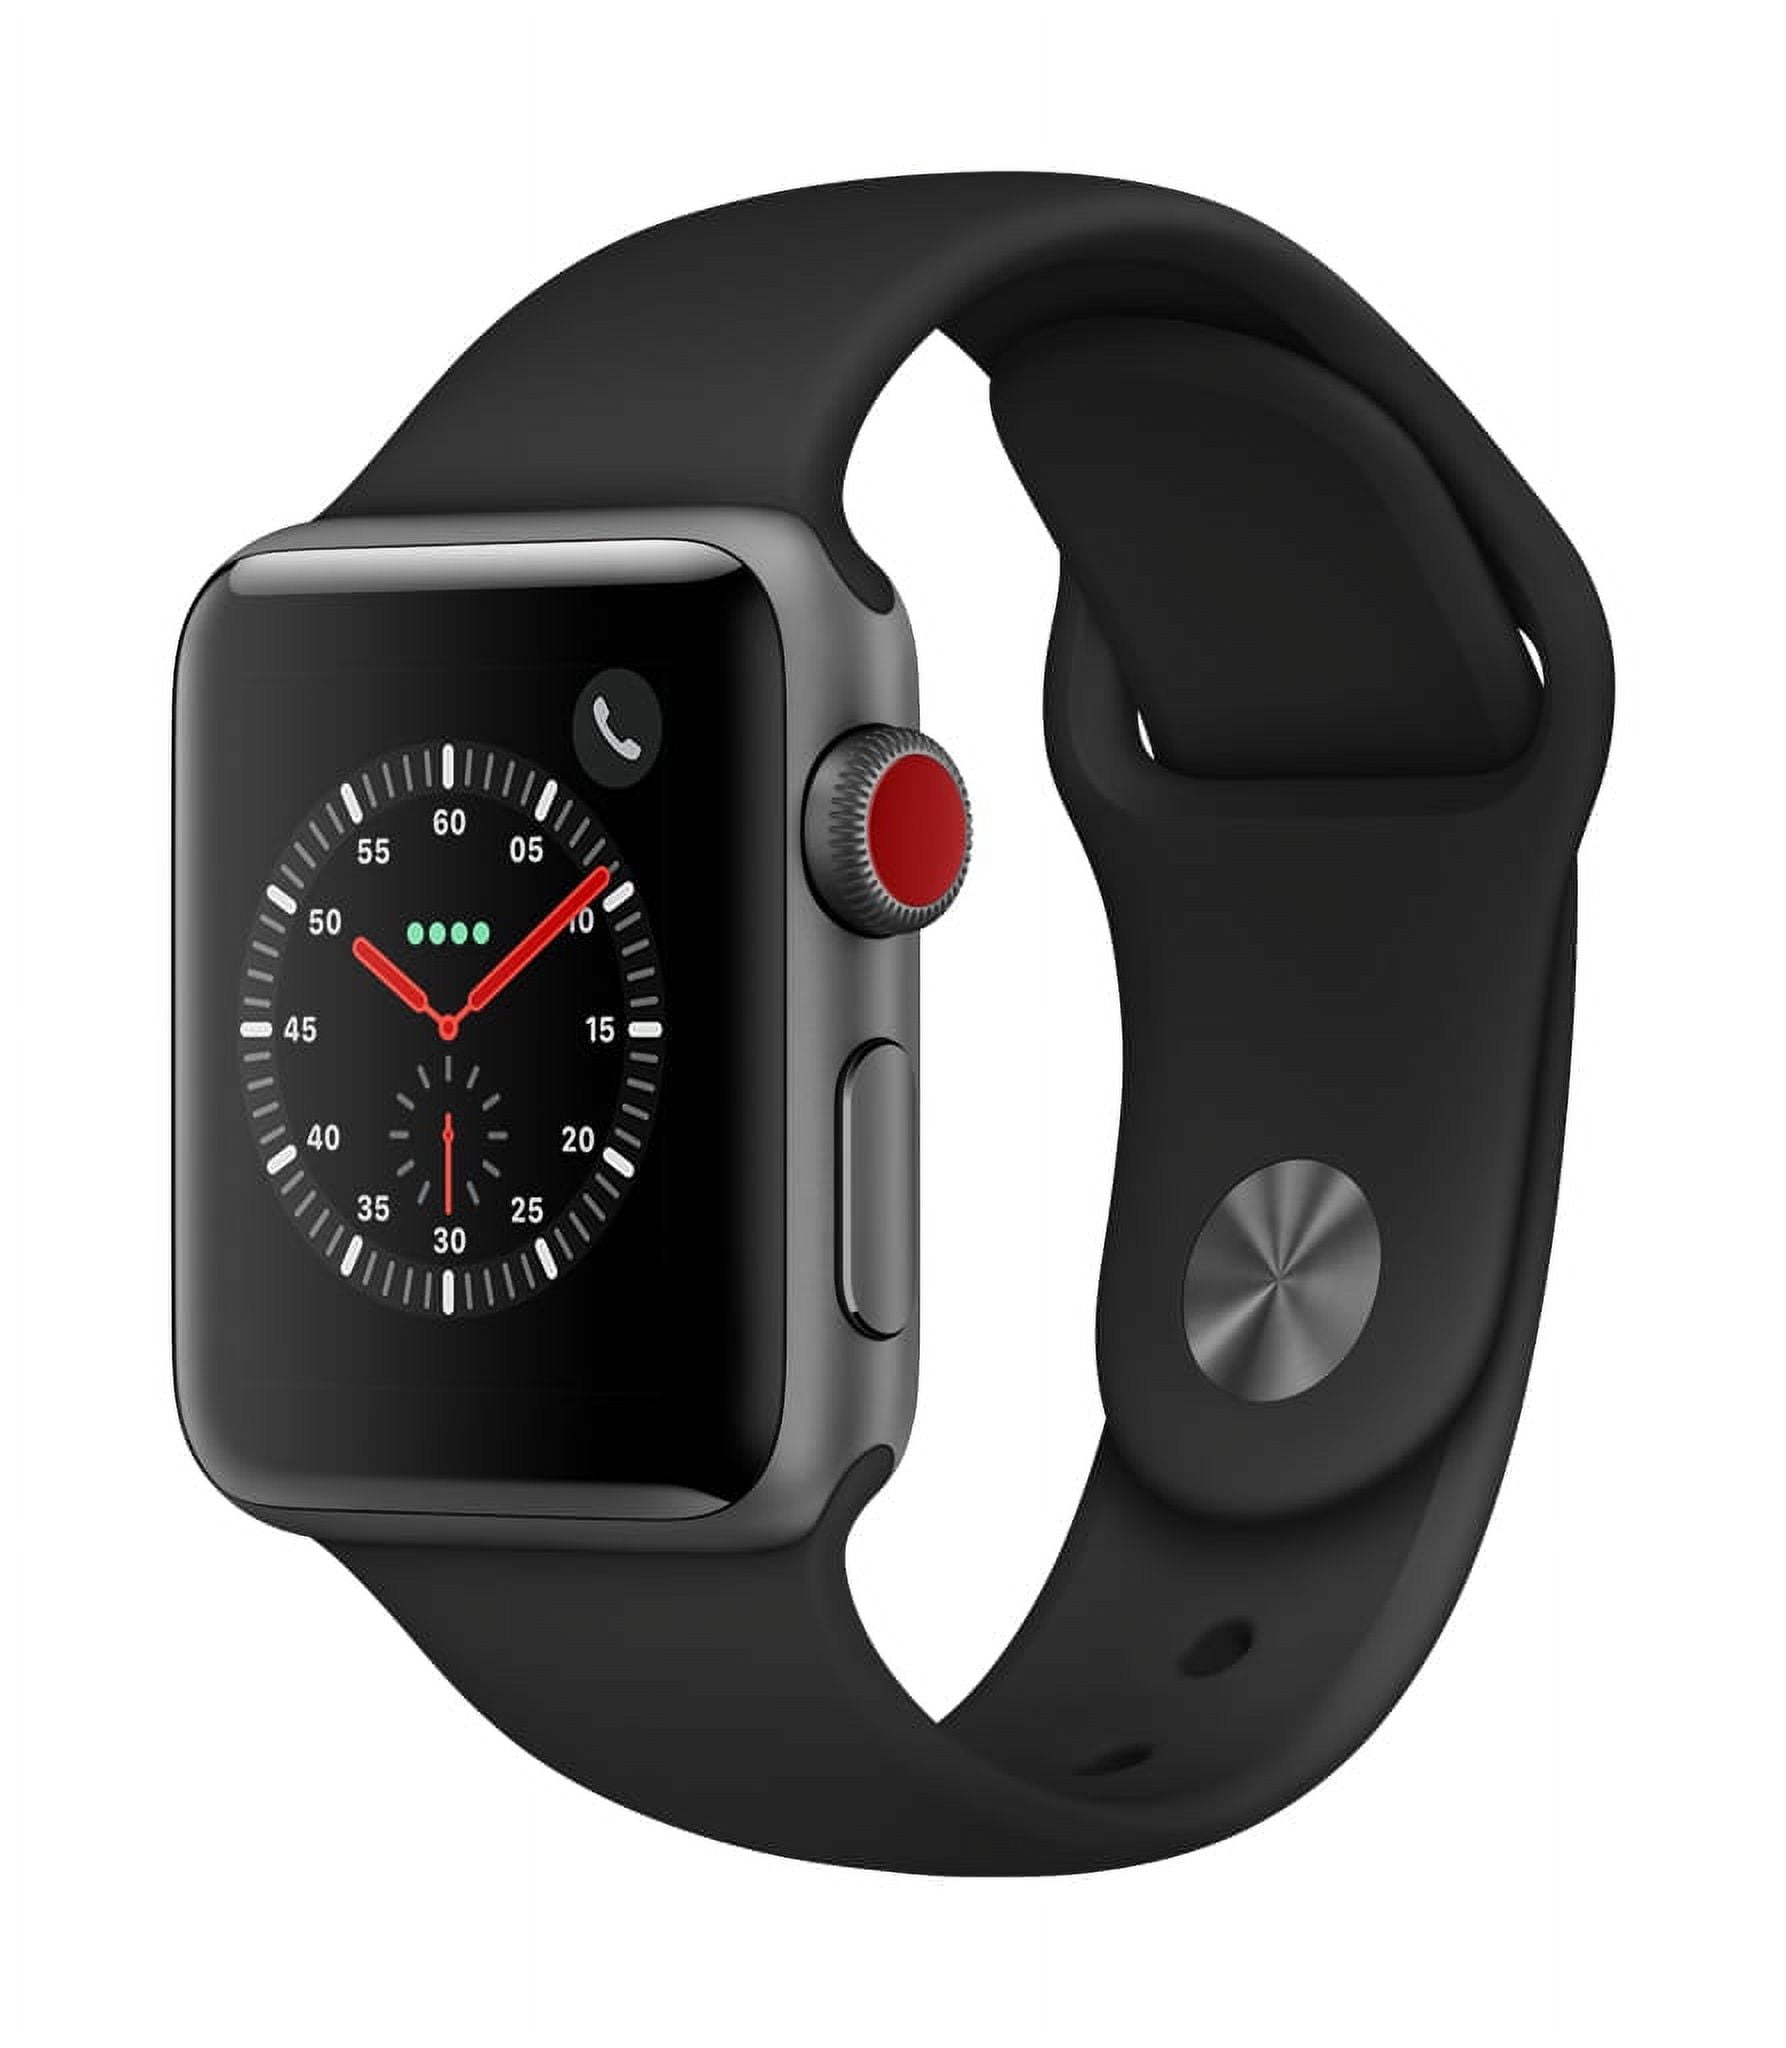 Apple Watch Series 3 GPS + Cellular - 38mm - Sport Band - Aluminum Case  -Space Gray/Black